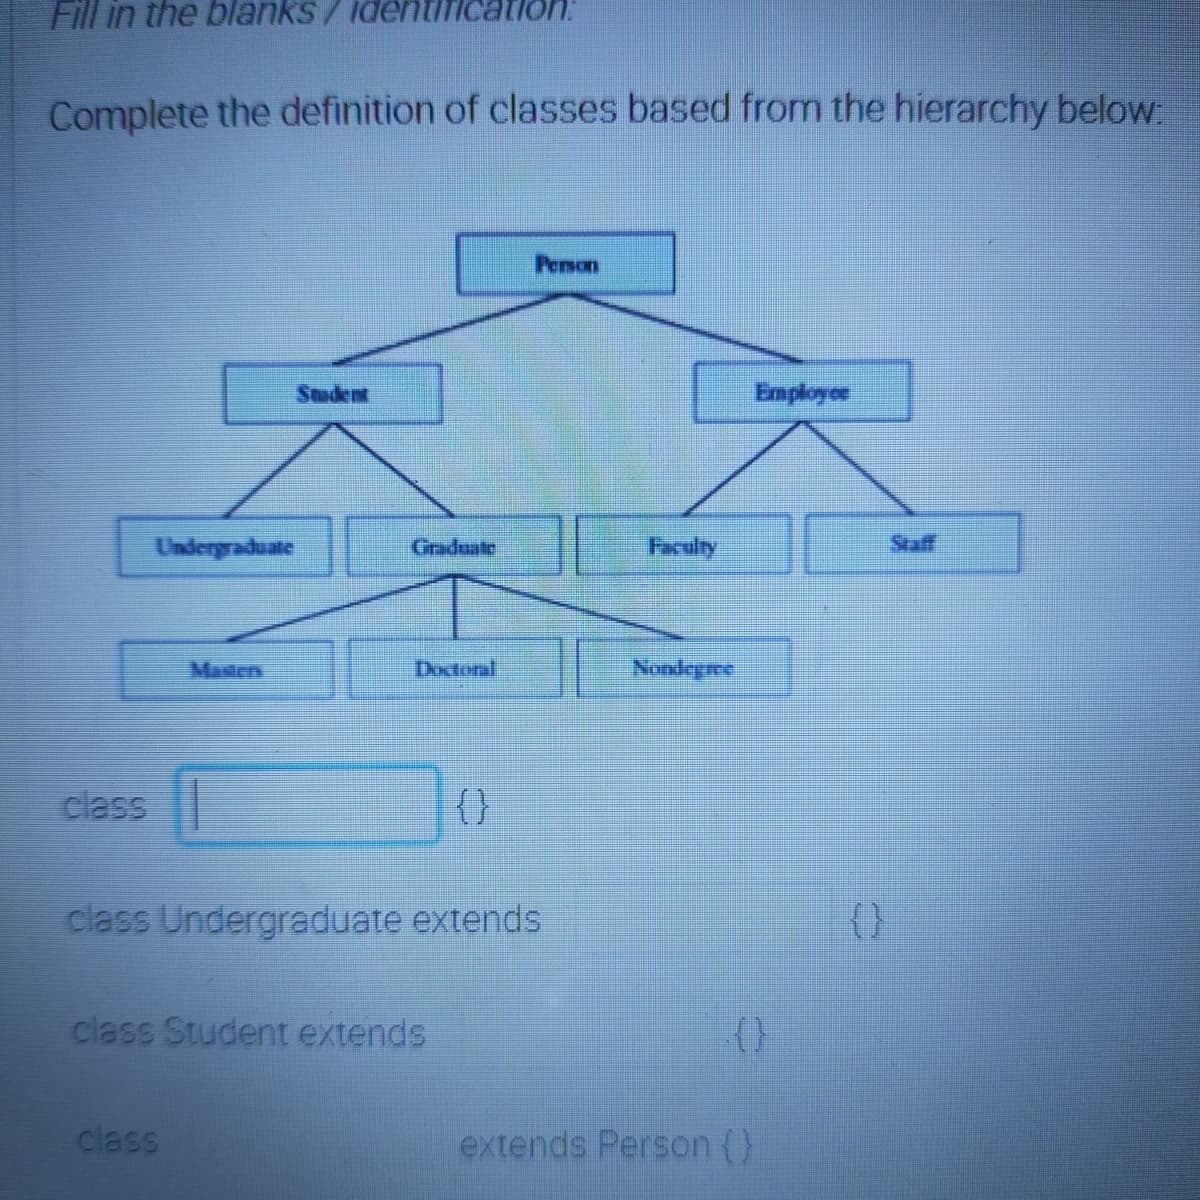 Fill in the blanks/identific
Complete the definition of classes based from the hierarchy below
Penson
Student
Employoe
Undergraduate
Graduate
Faculty
Staff
Masters
Doctoral
Nondegre
class
{}
class Undergraduate extends
(}
class Student extends
class
extends Person (}
